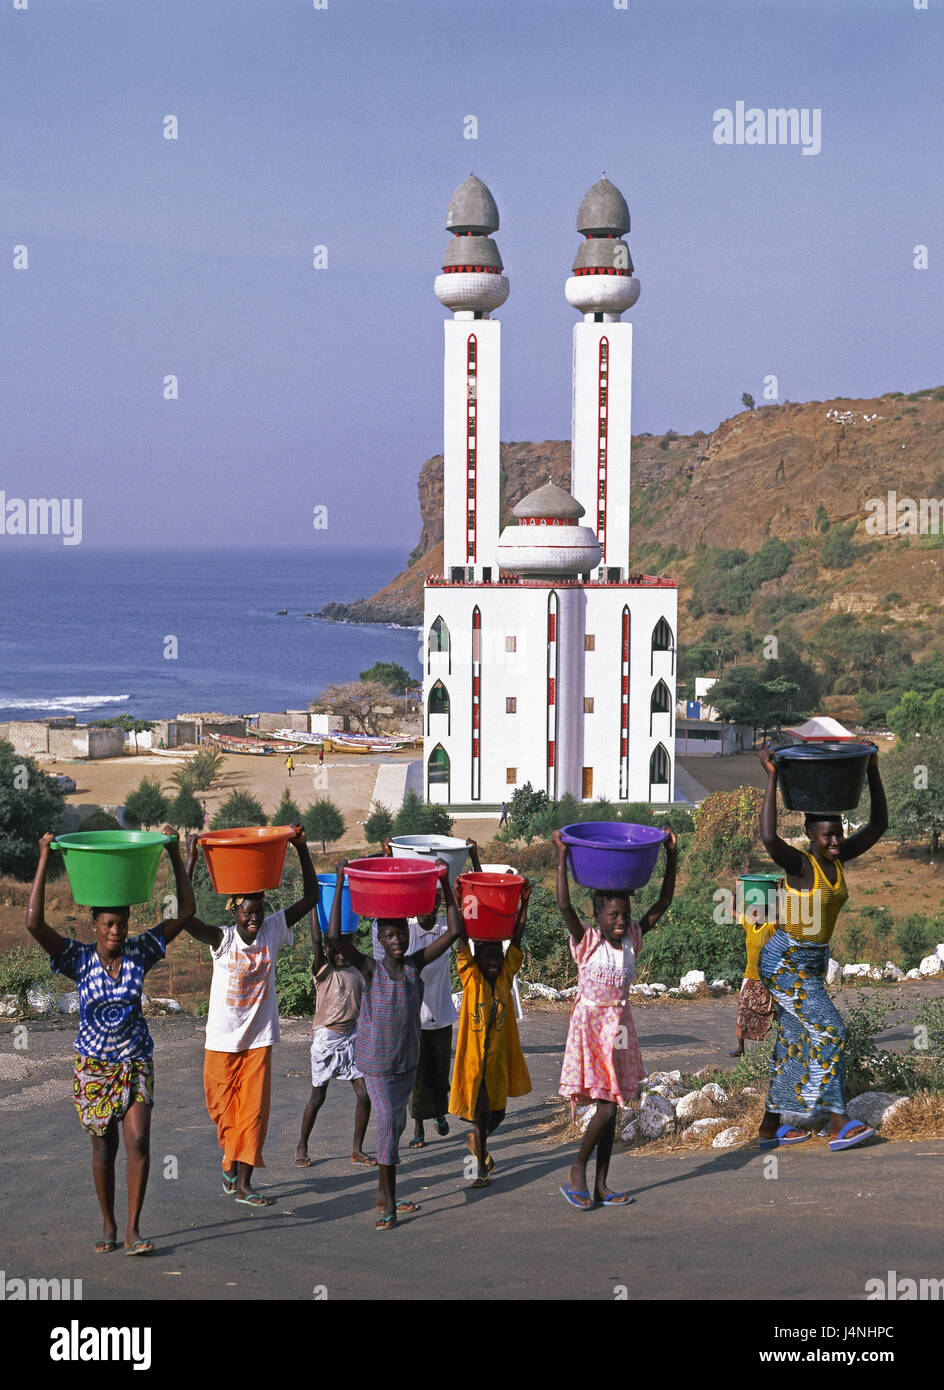 Africa, Senegal, Dakar, Ouakam, person, mosque, town, capital, mosque, building, structure, coast, sea, part of town, women, locals, Africans, cases, water, carry, head costs, faith, religion, Islam, Stock Photo